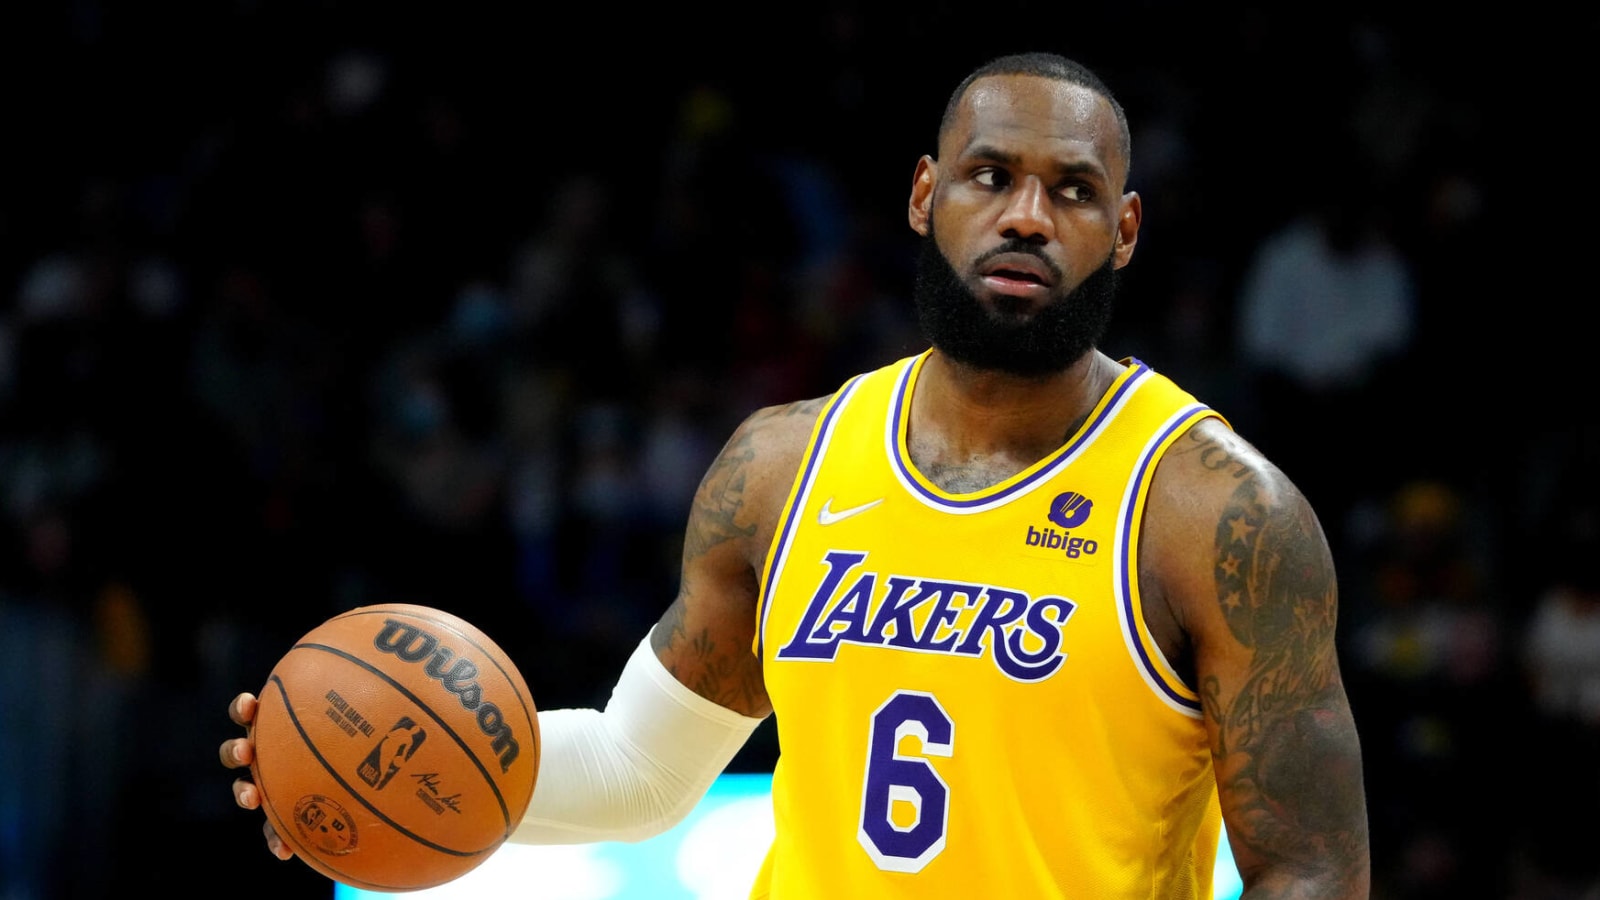 Rich Paul meets with Lakers, says LeBron's 'primary objective' is to stay in L.A.